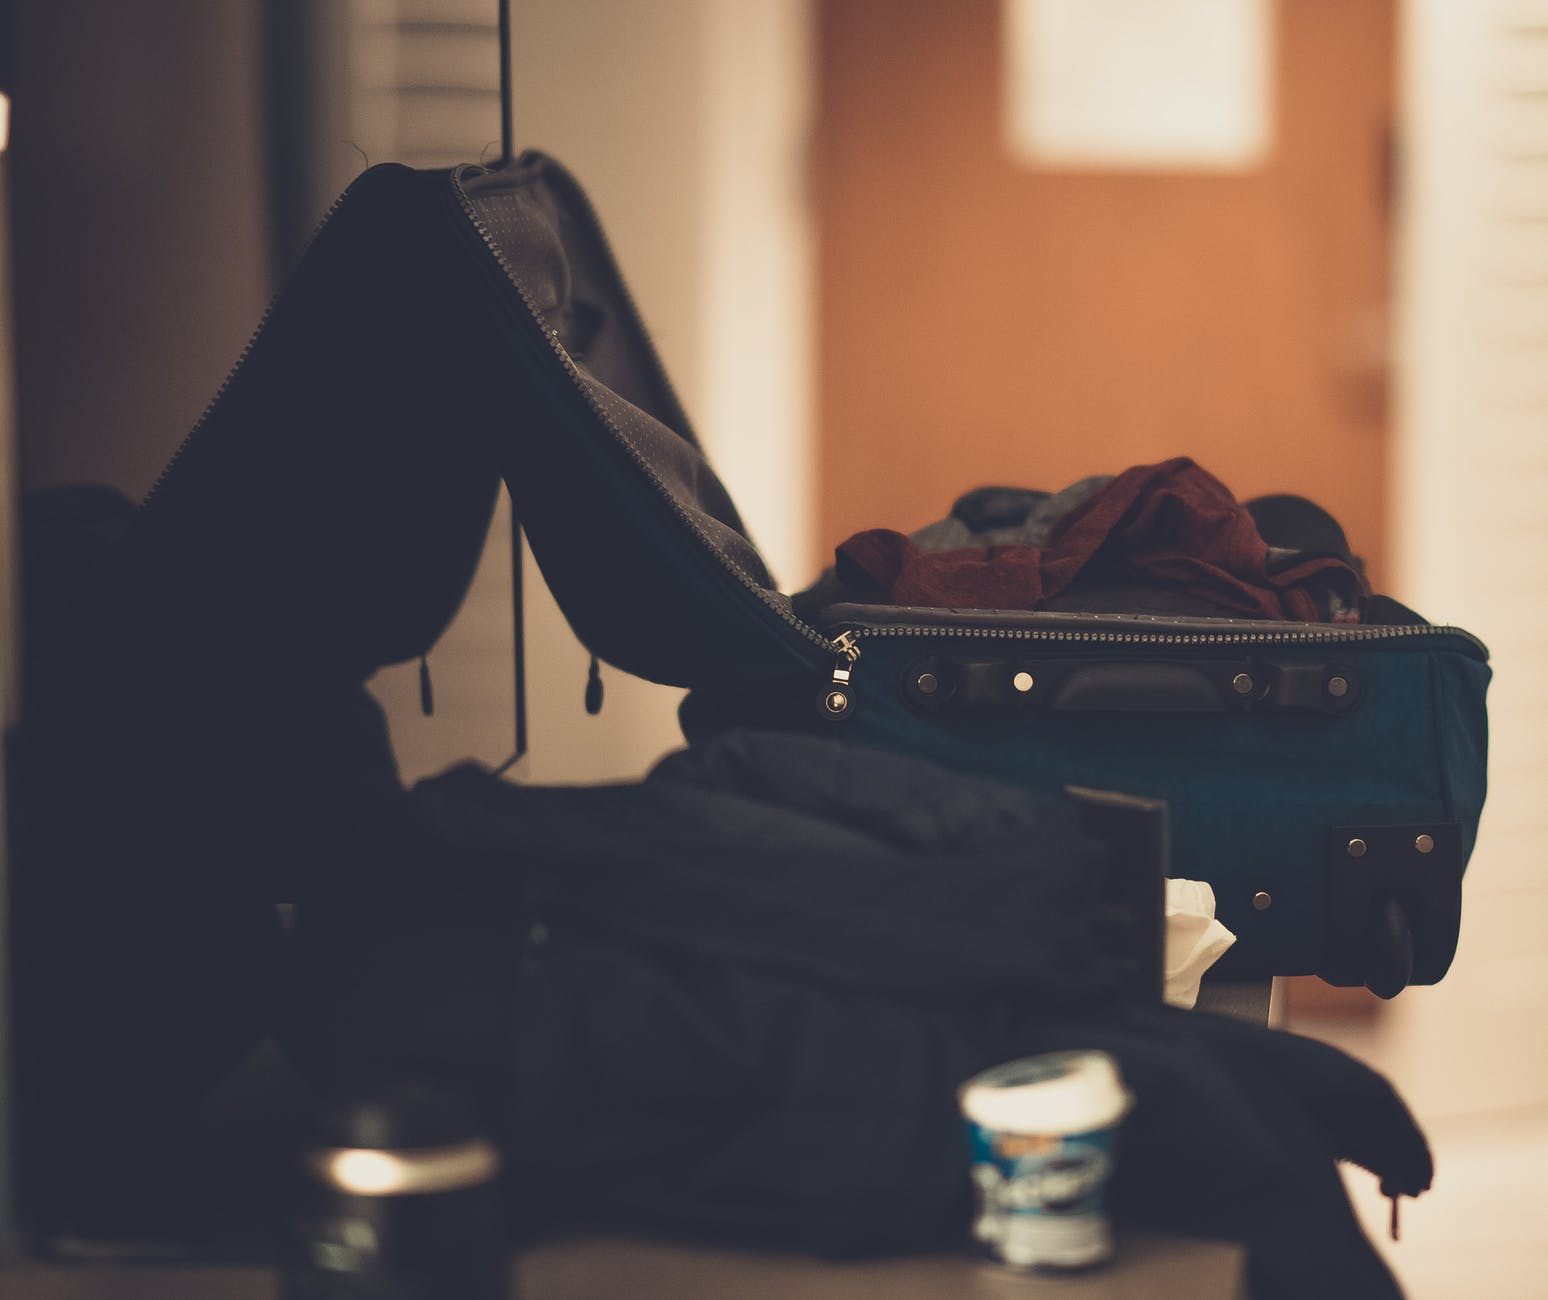 Christina thought of a solution and finished packing. | Source: Pexels